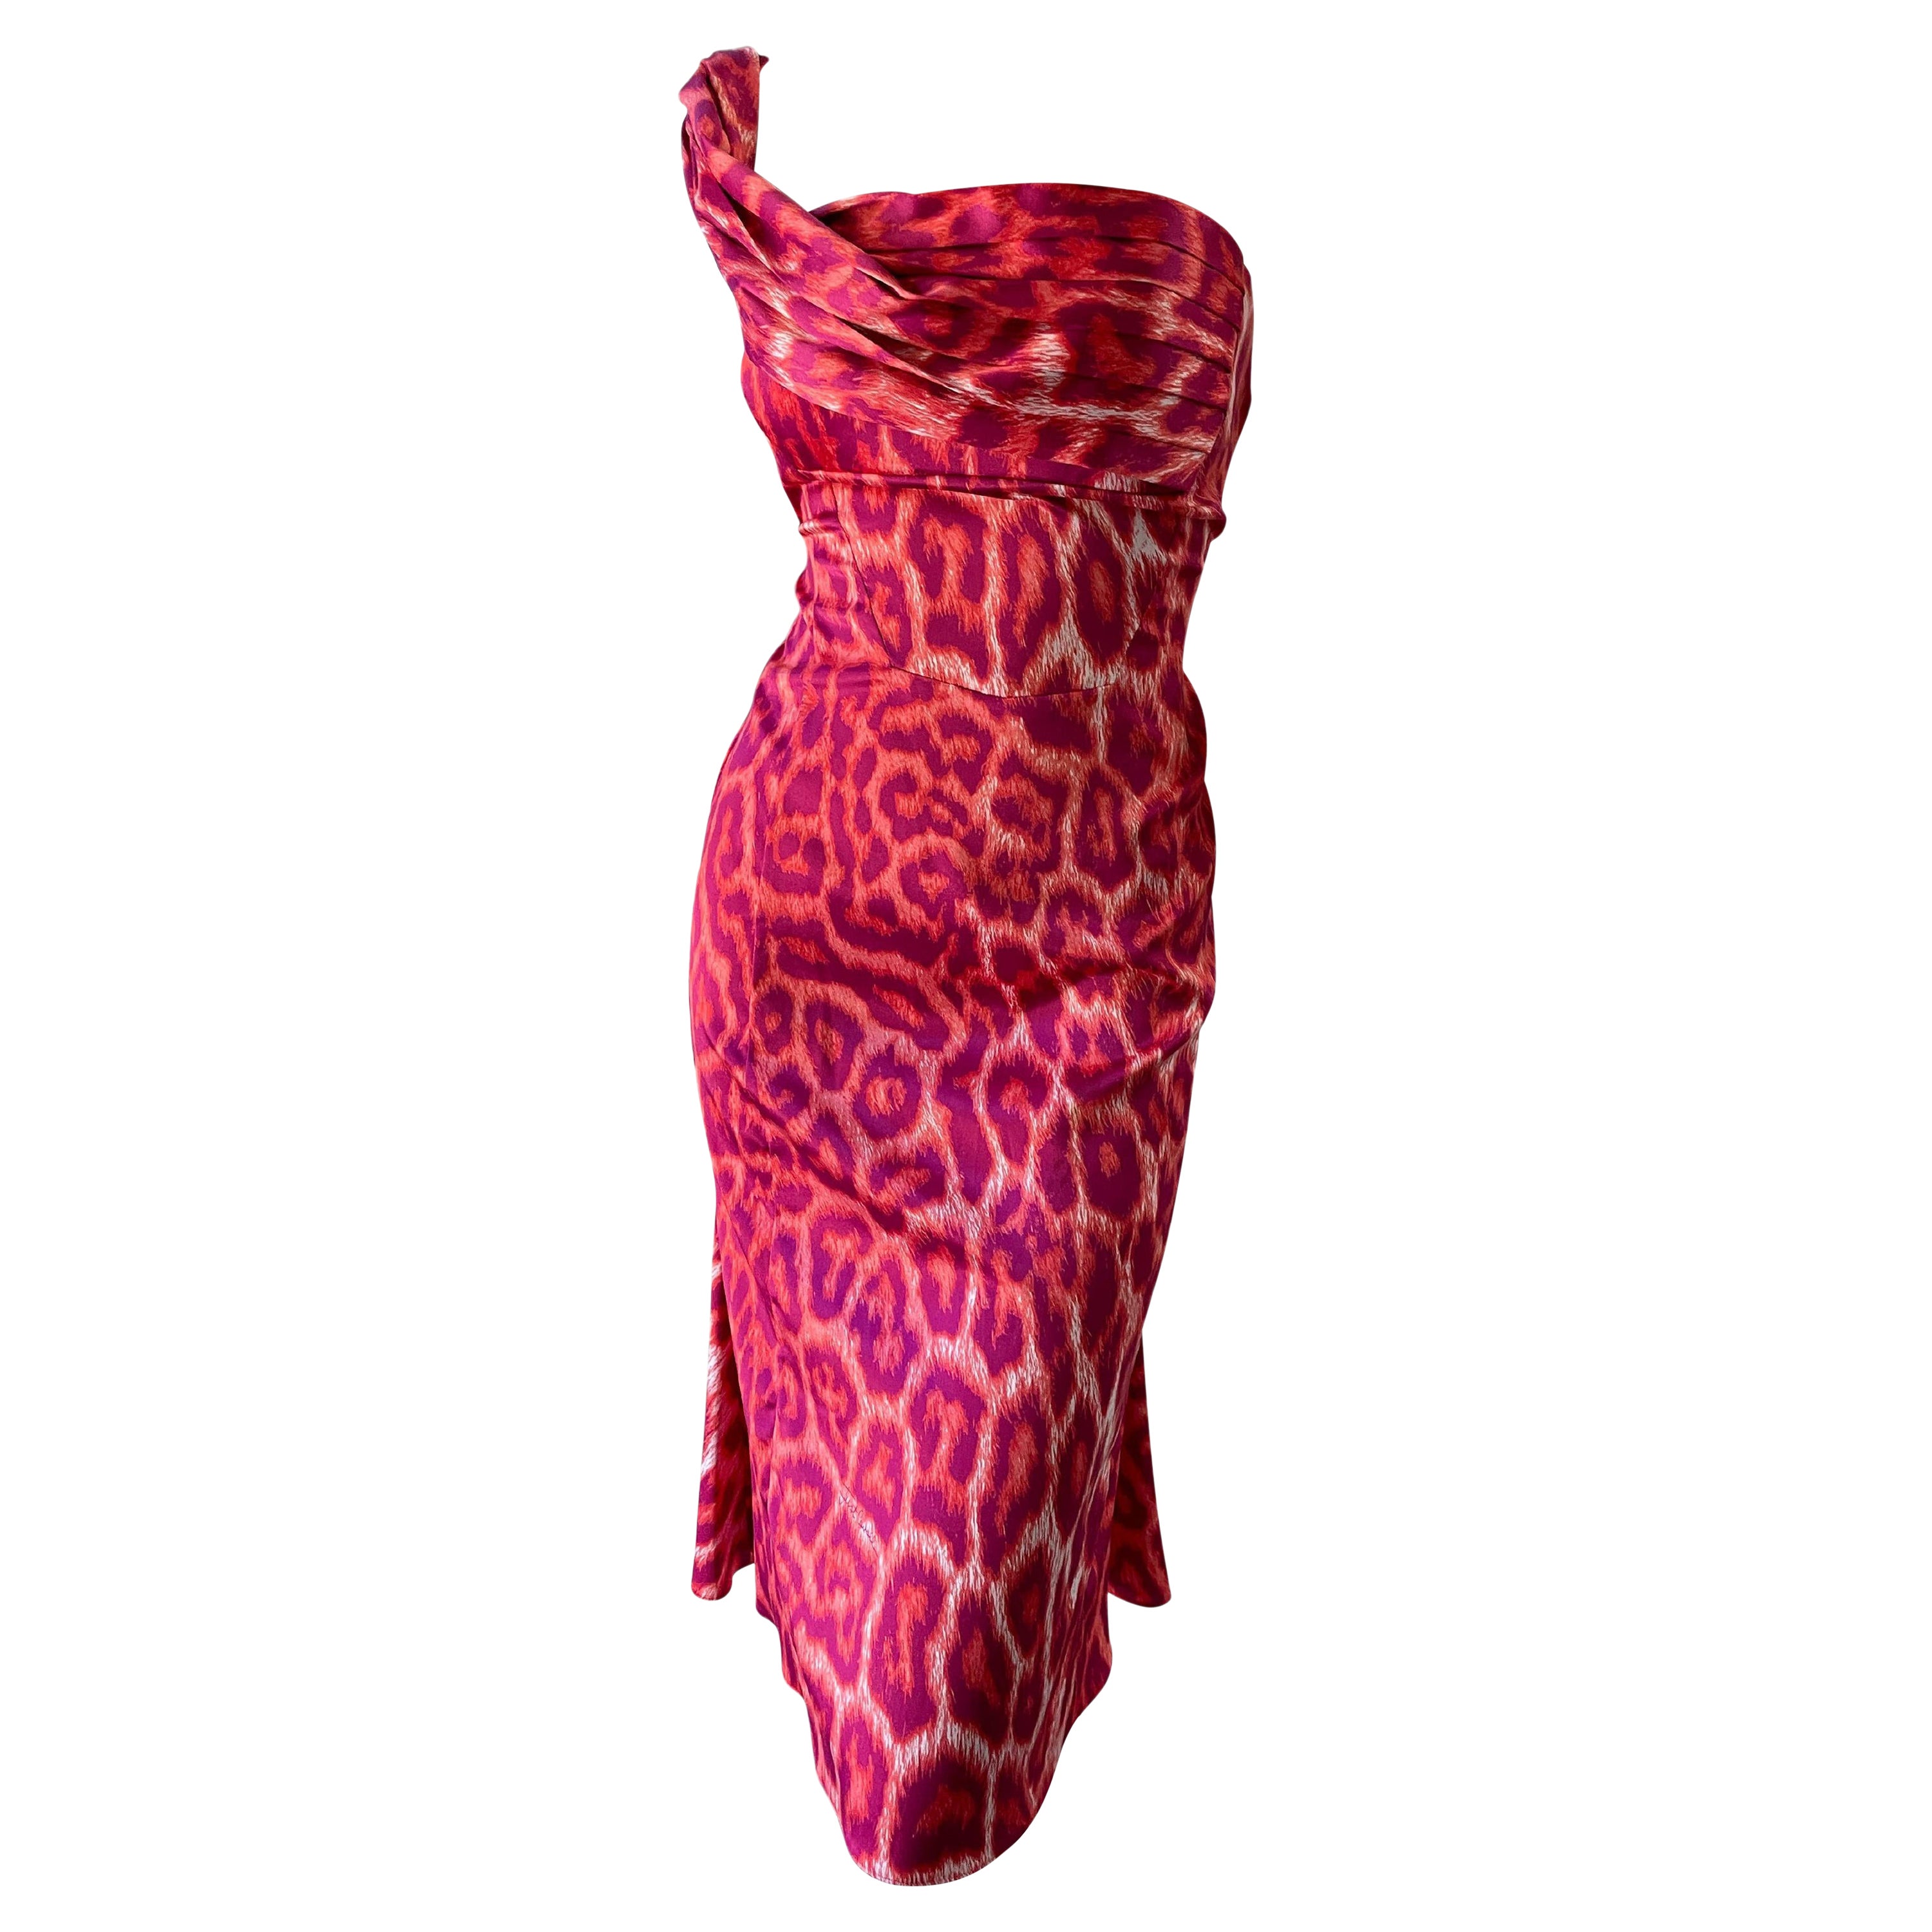 Just Cavalli Vintage One Shoulder Red Leopard Print Cocktail Dress New with Tags